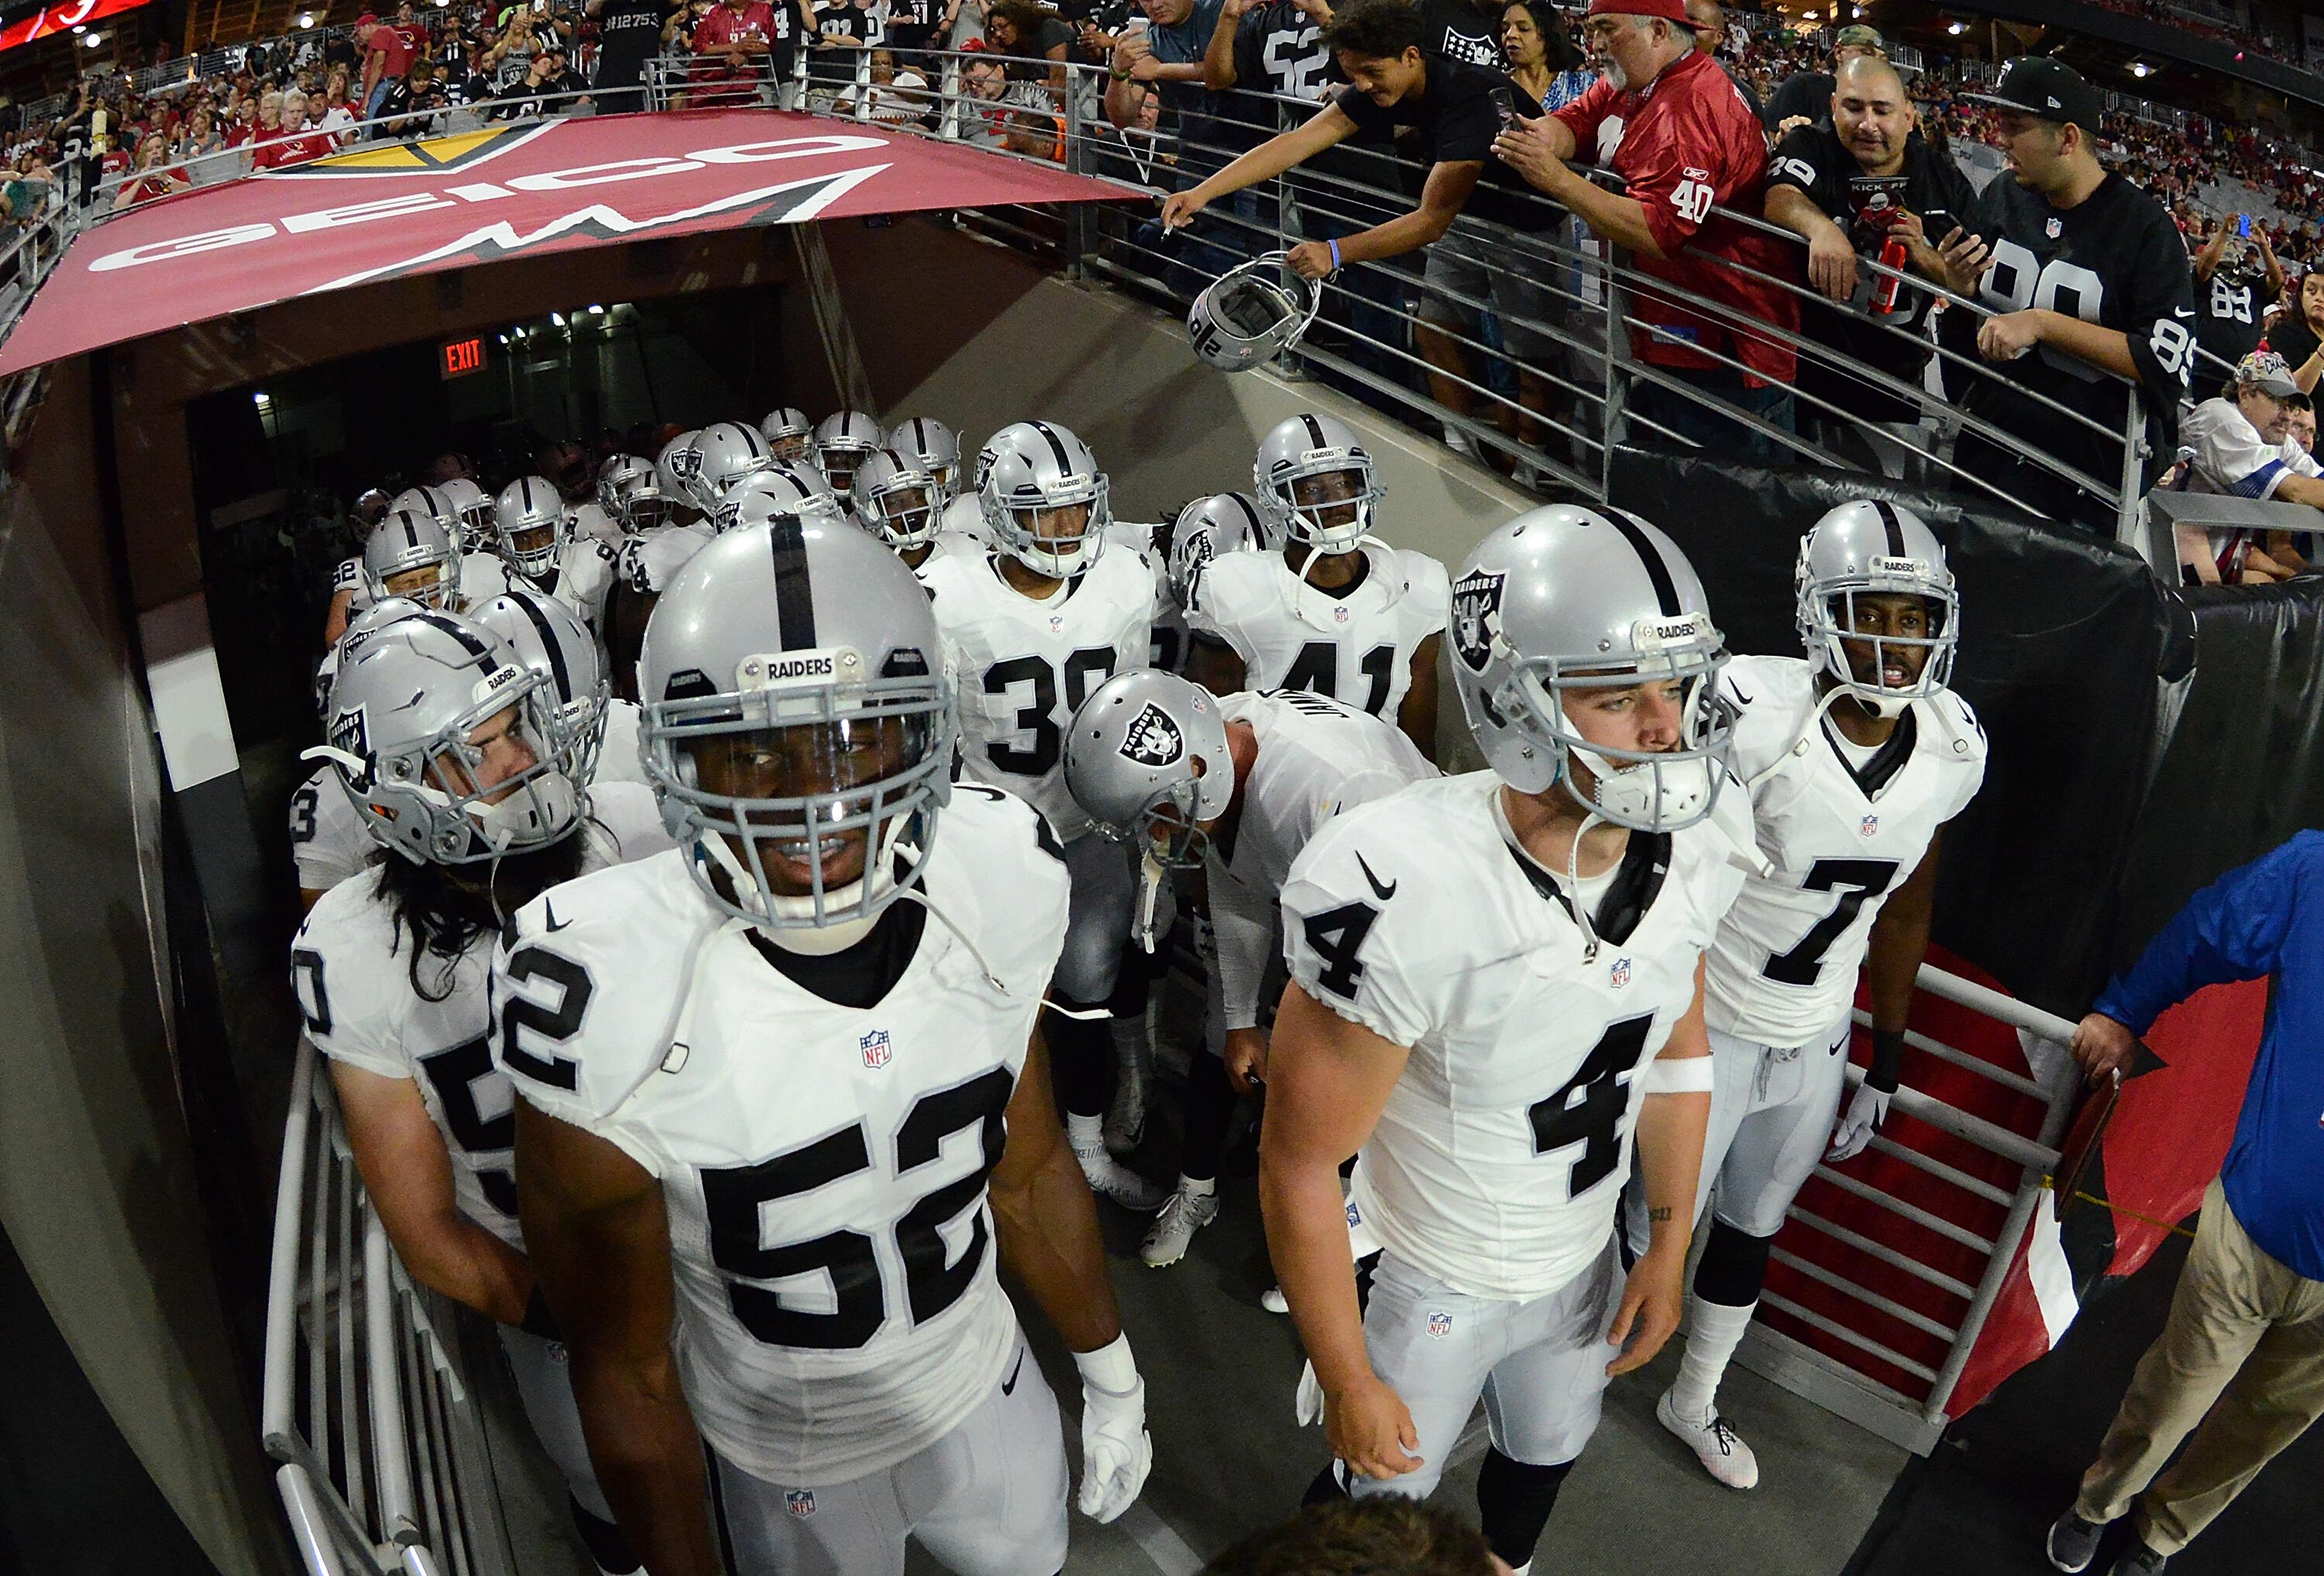 GLENDALE, AZ - AUGUST 12:  Derek Carr #4, Khalil Mack #52 and Marquette King #7 of the Oakland Raiders and teammates get ready to run onto the field prior to the start of a preseason game against the Arizona Cardinals at University of Phoenix Stadium on A